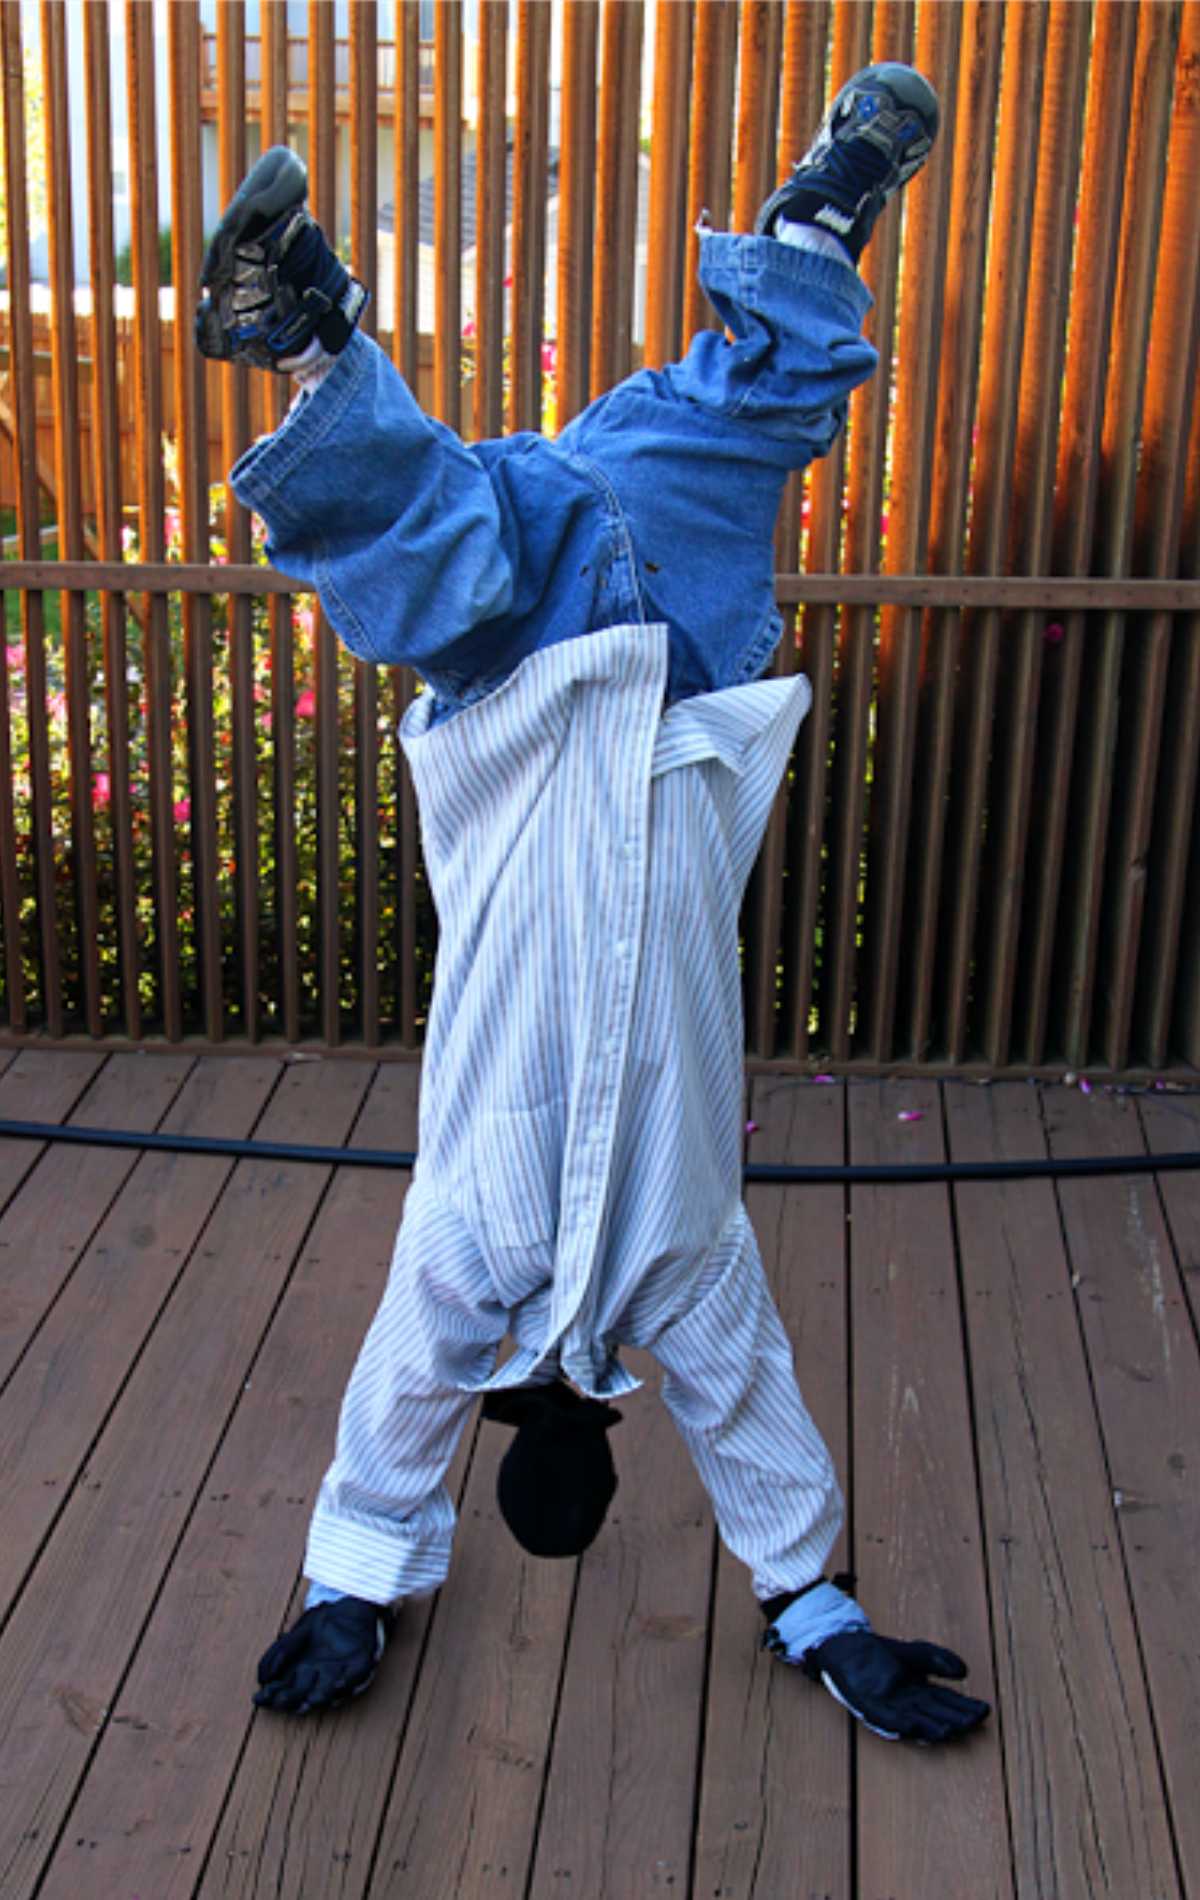 Upside down man costume with feet in the air and hands on the ground.